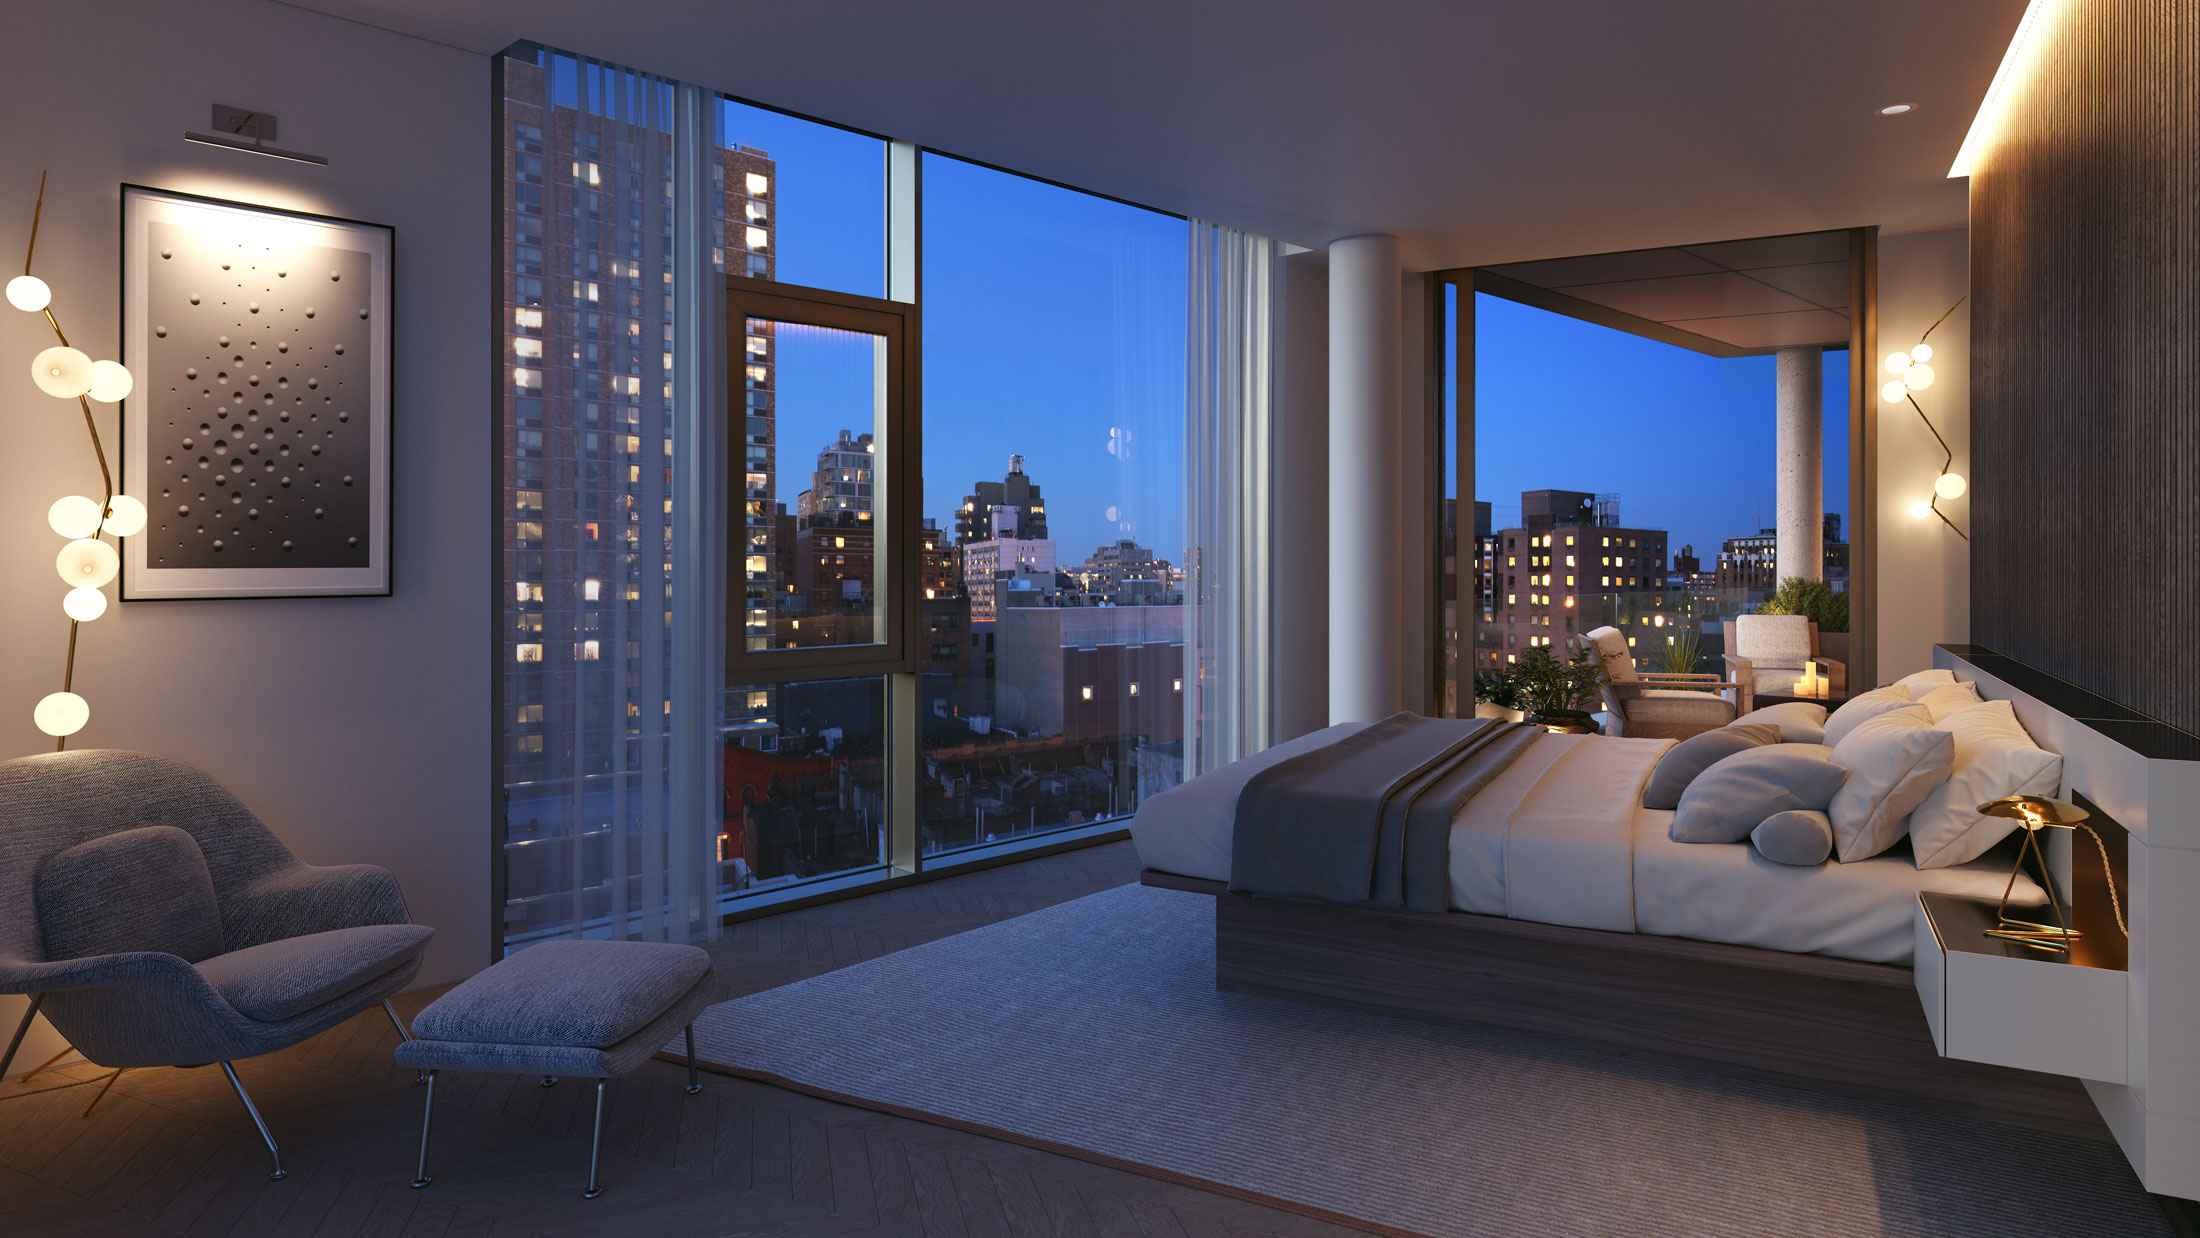 Architectural Rendering of the master bedroom of the 80 East 10th Street project located in Greenwich Village in New York City